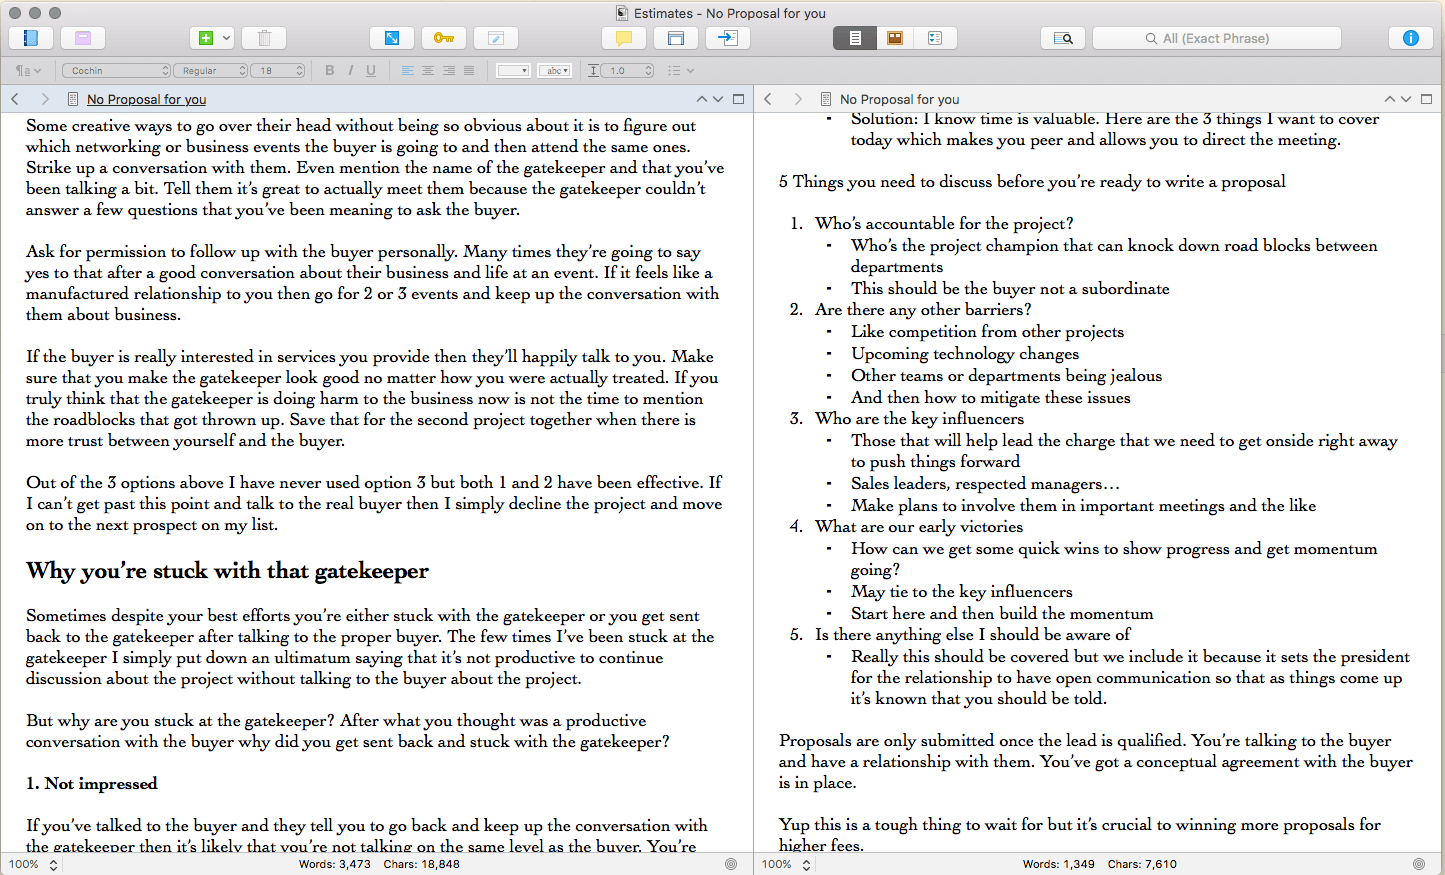 On the left is the finished content on the right is the research for the book. Love me some split pane in Scrivener.